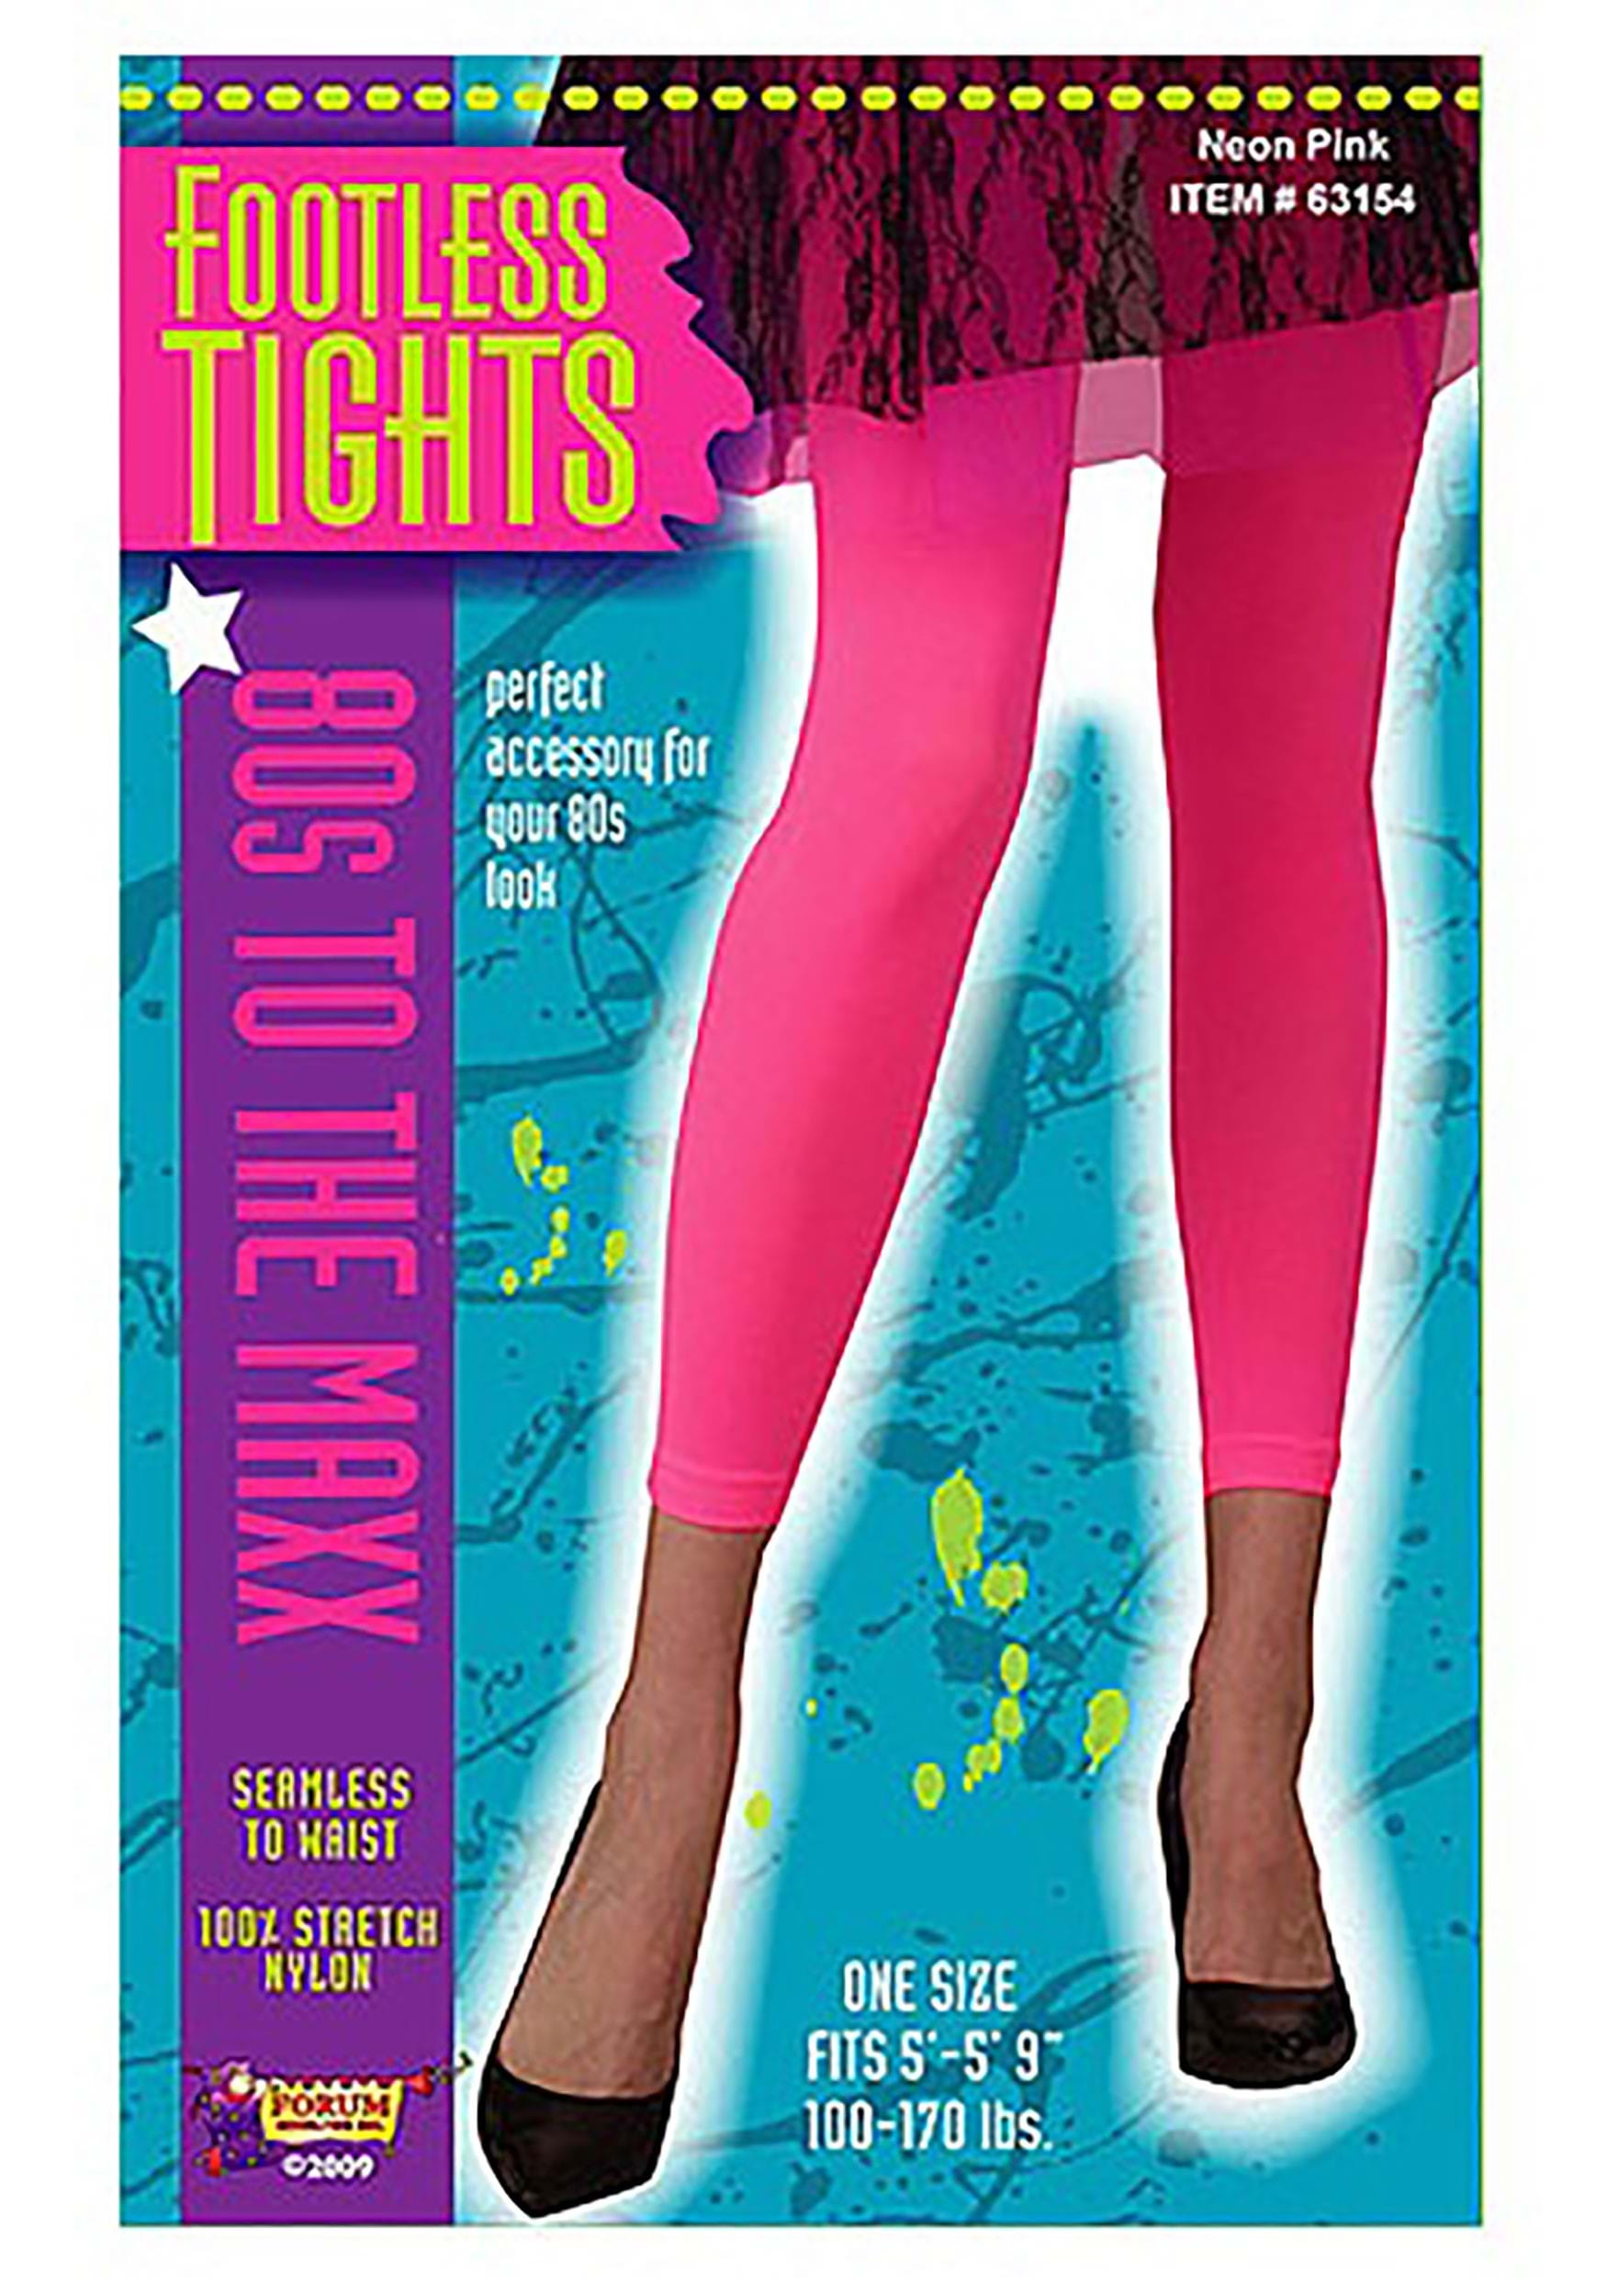 Footed Bright Neon Tights Pantyhose Panty Hose 80s Stockings